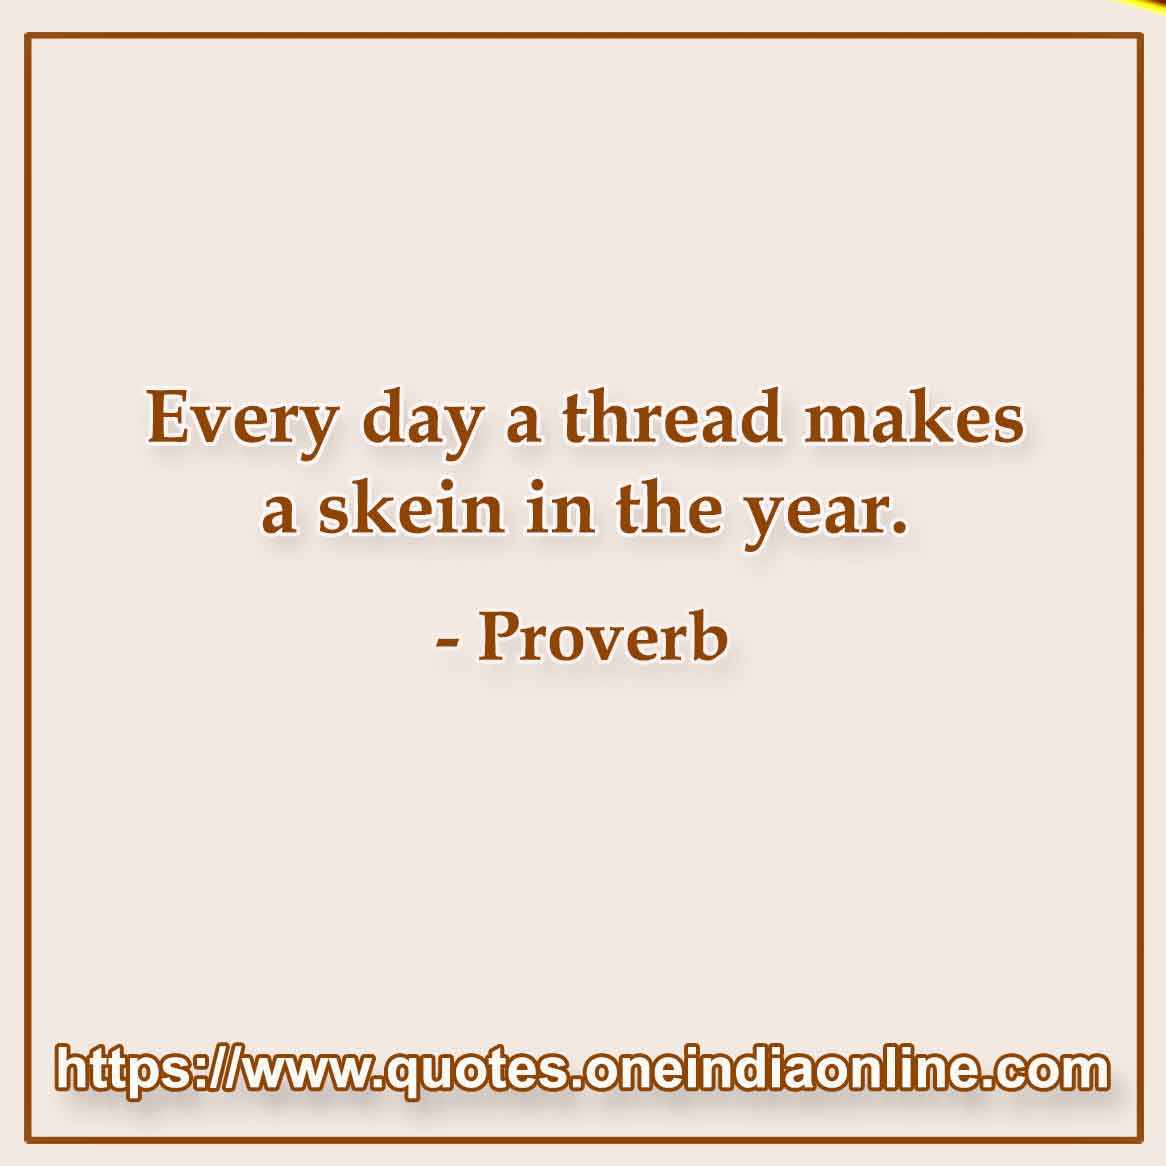 Every day a thread makes a skein in the year.

